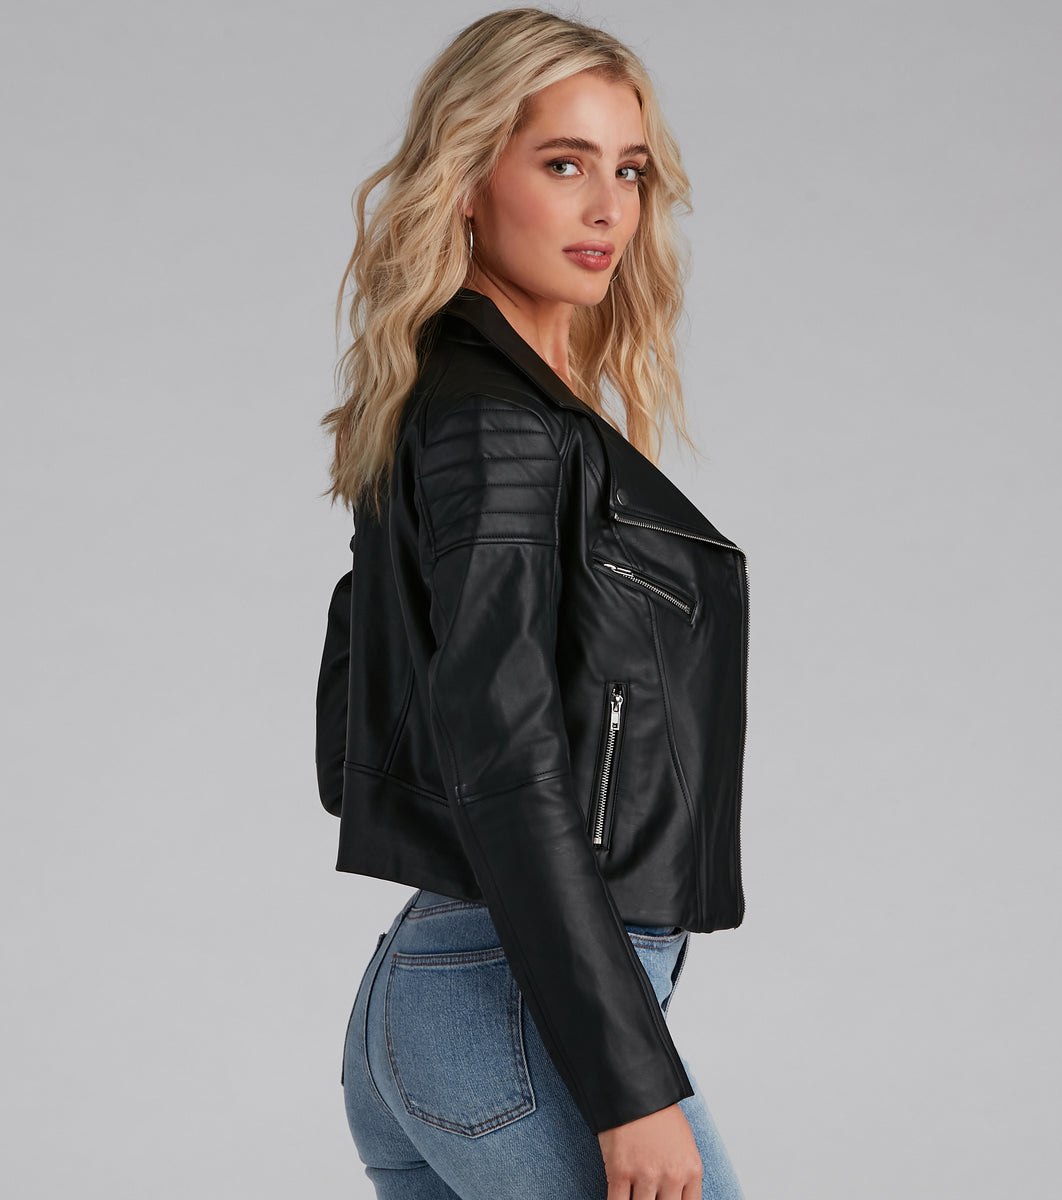 The Getaway Black Faux Leather Quilted Fanny Pack